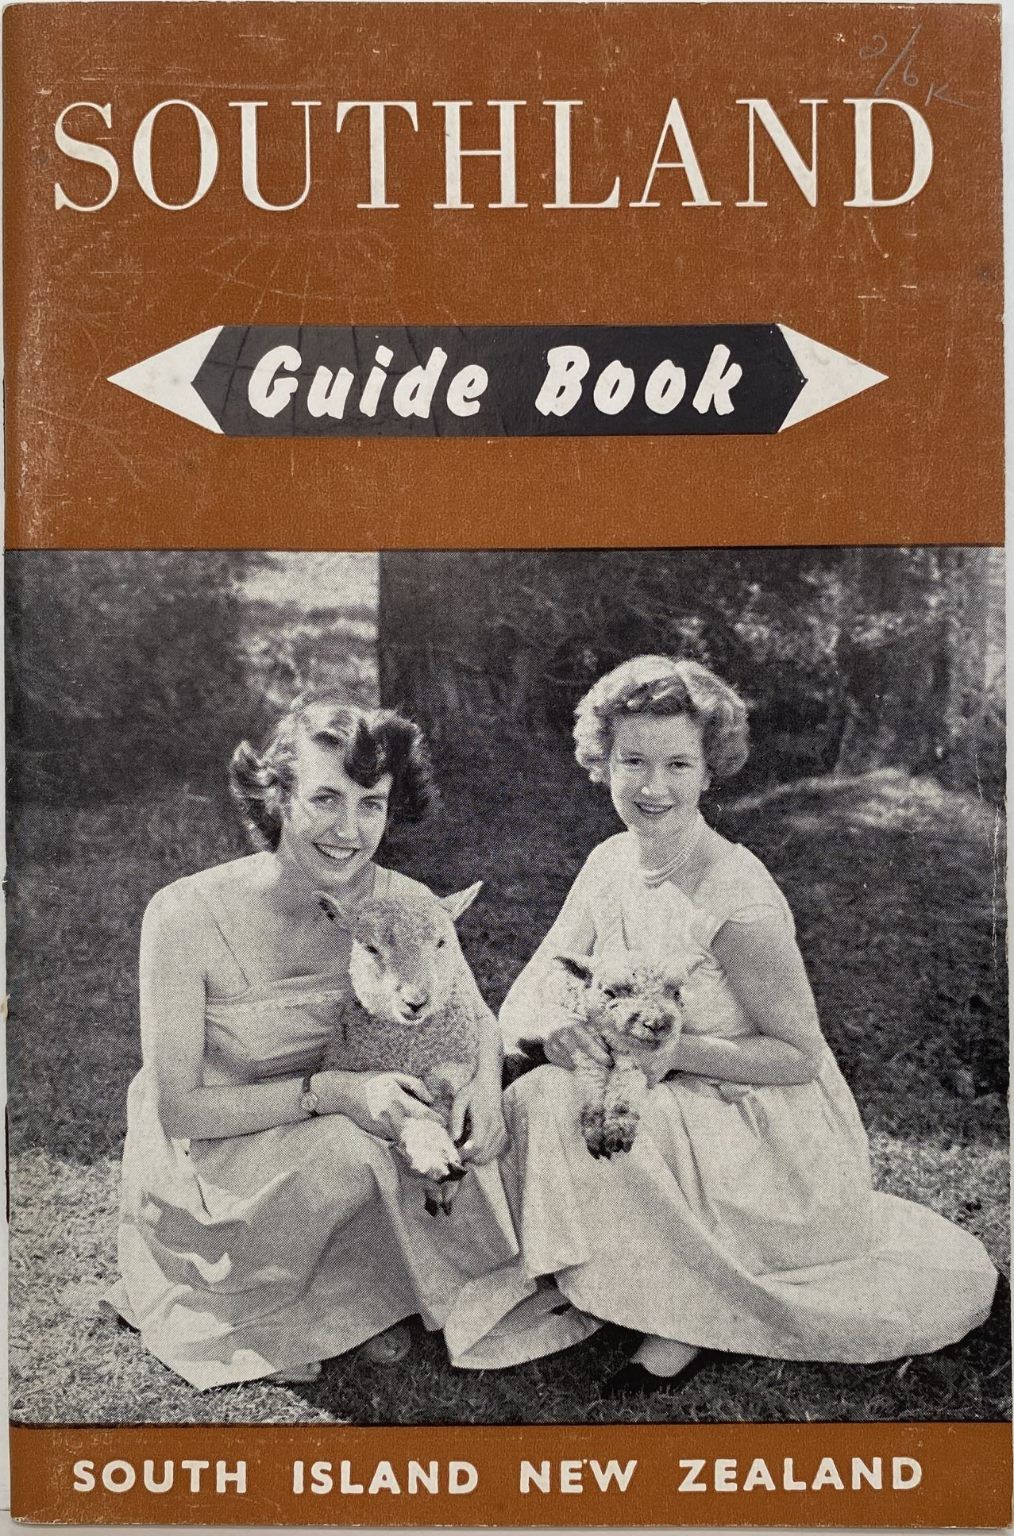 SOUTHLAND Guide Book